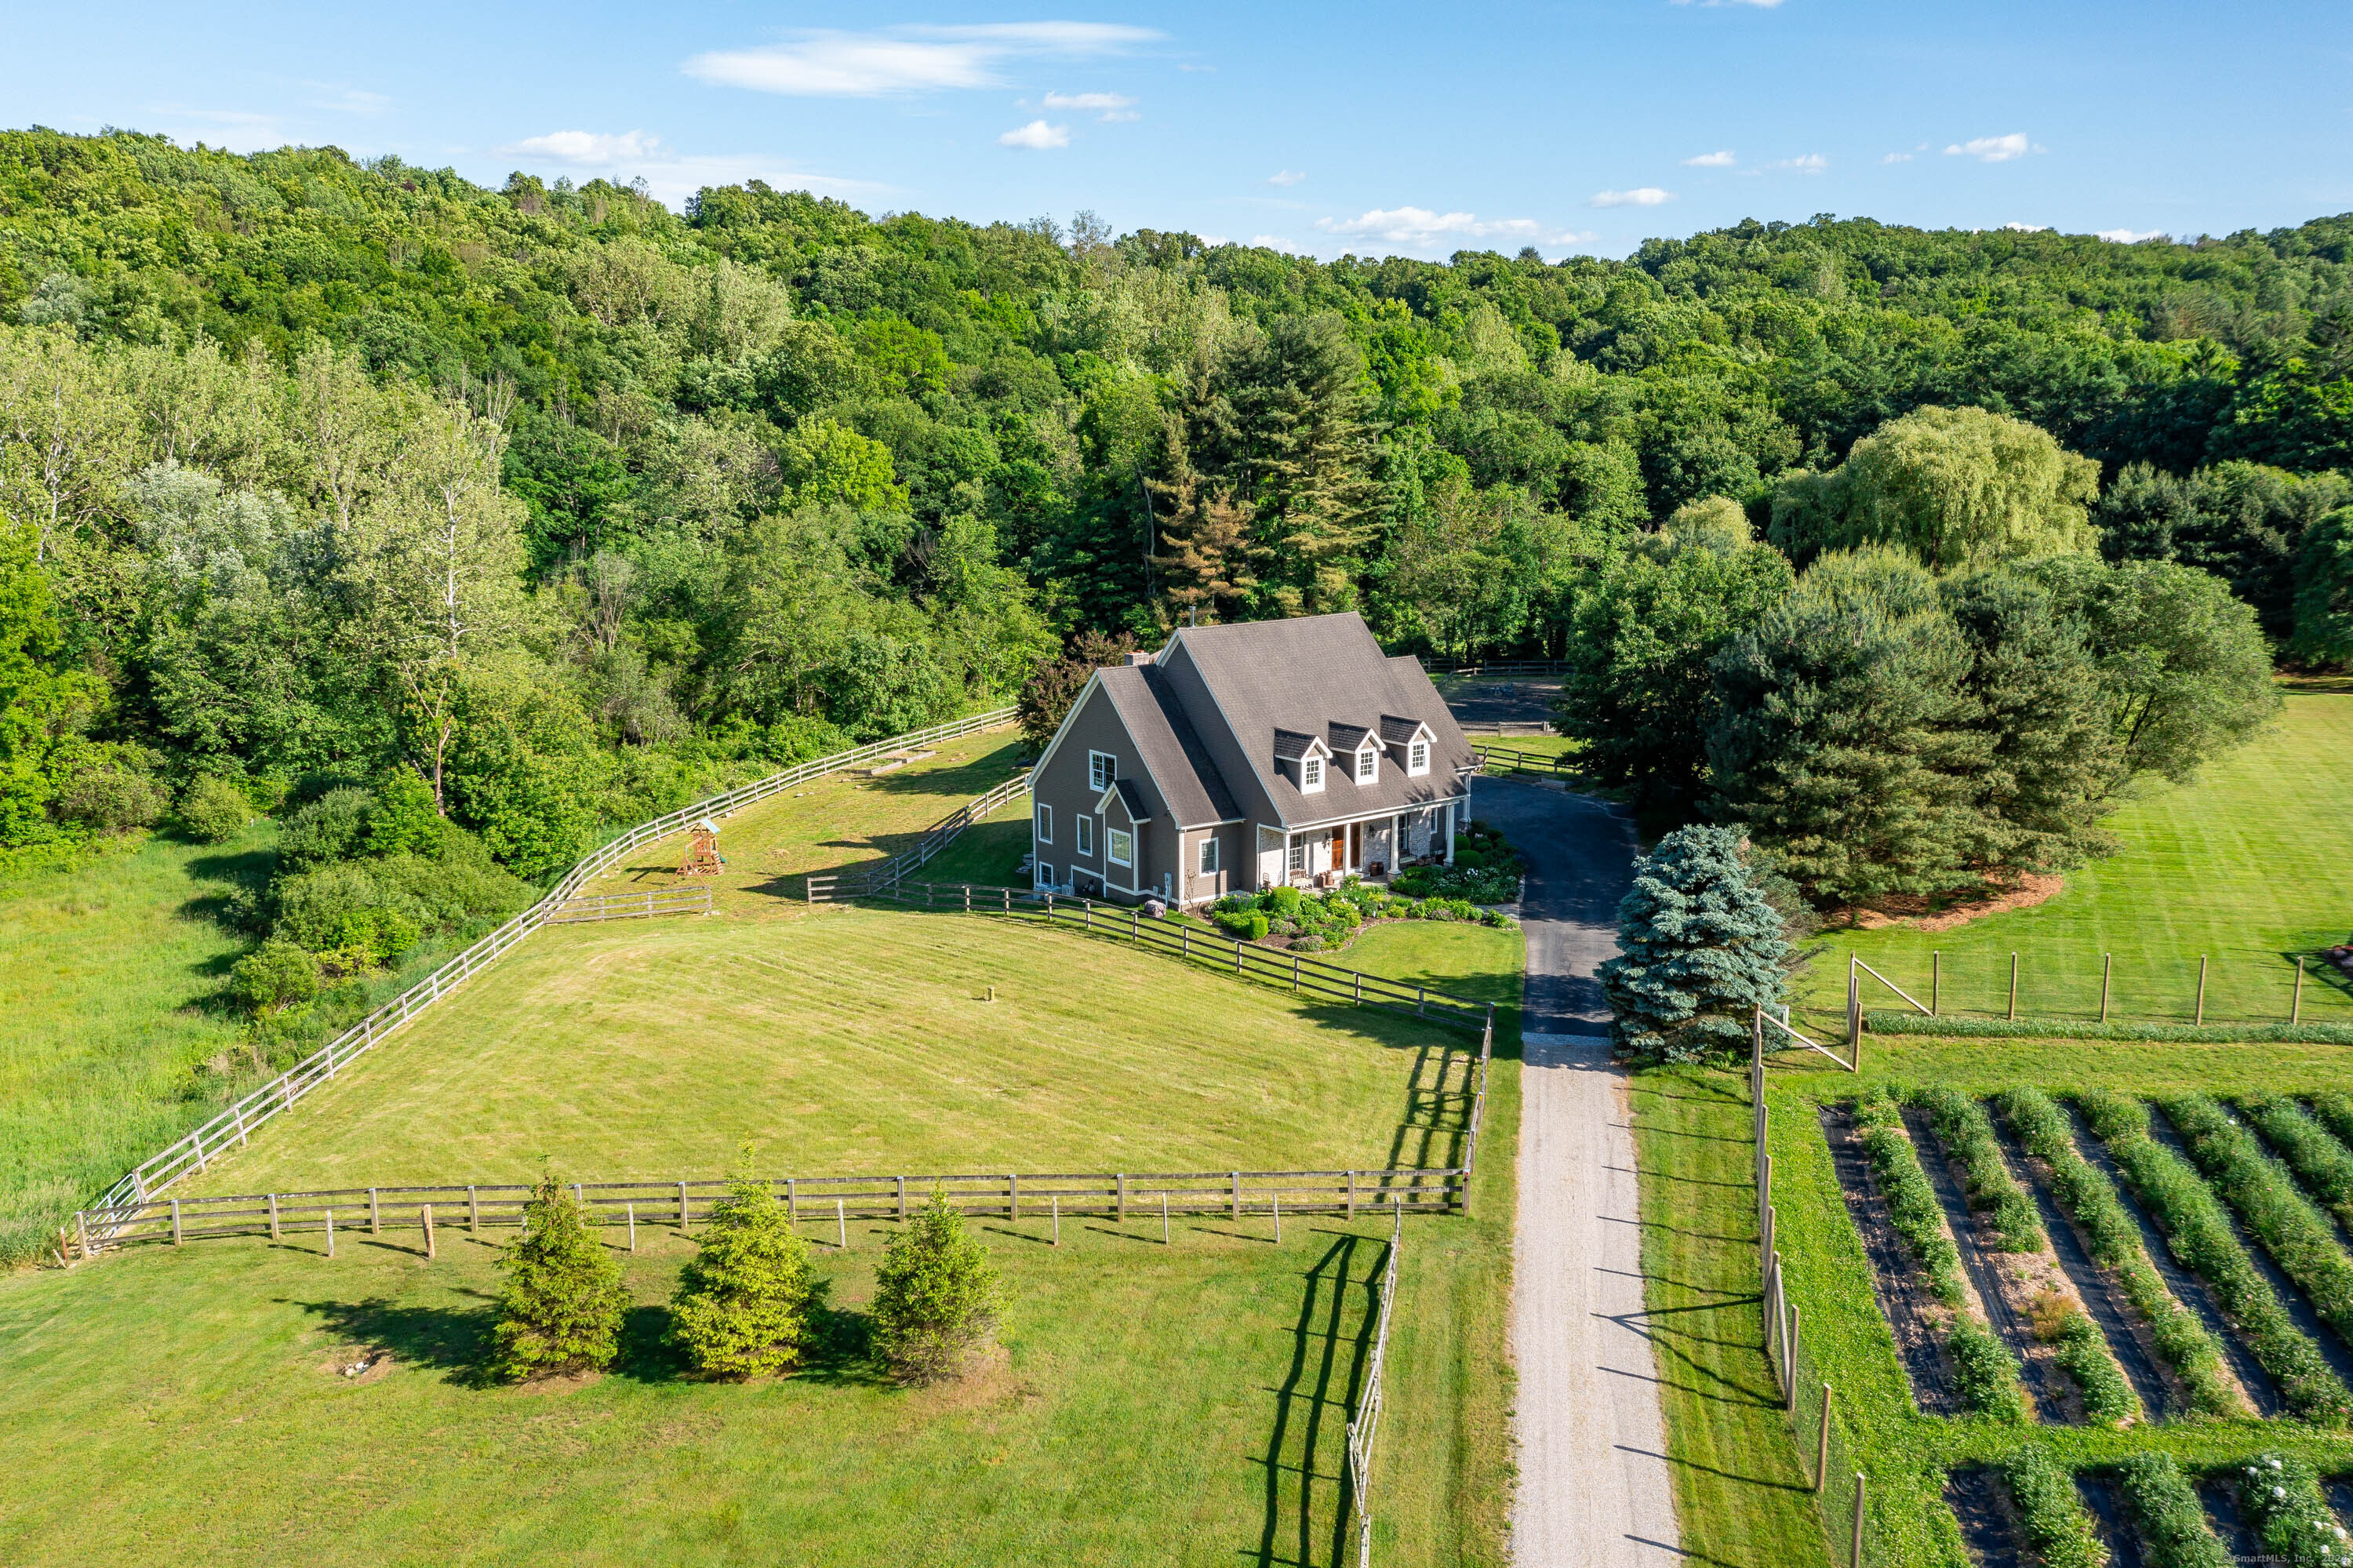 Welcome to 51 Pond Brook Road, a stunning 3.67 acre horse property with a barn, riding ring, and paddocks bordering the peaceful Pond Brook